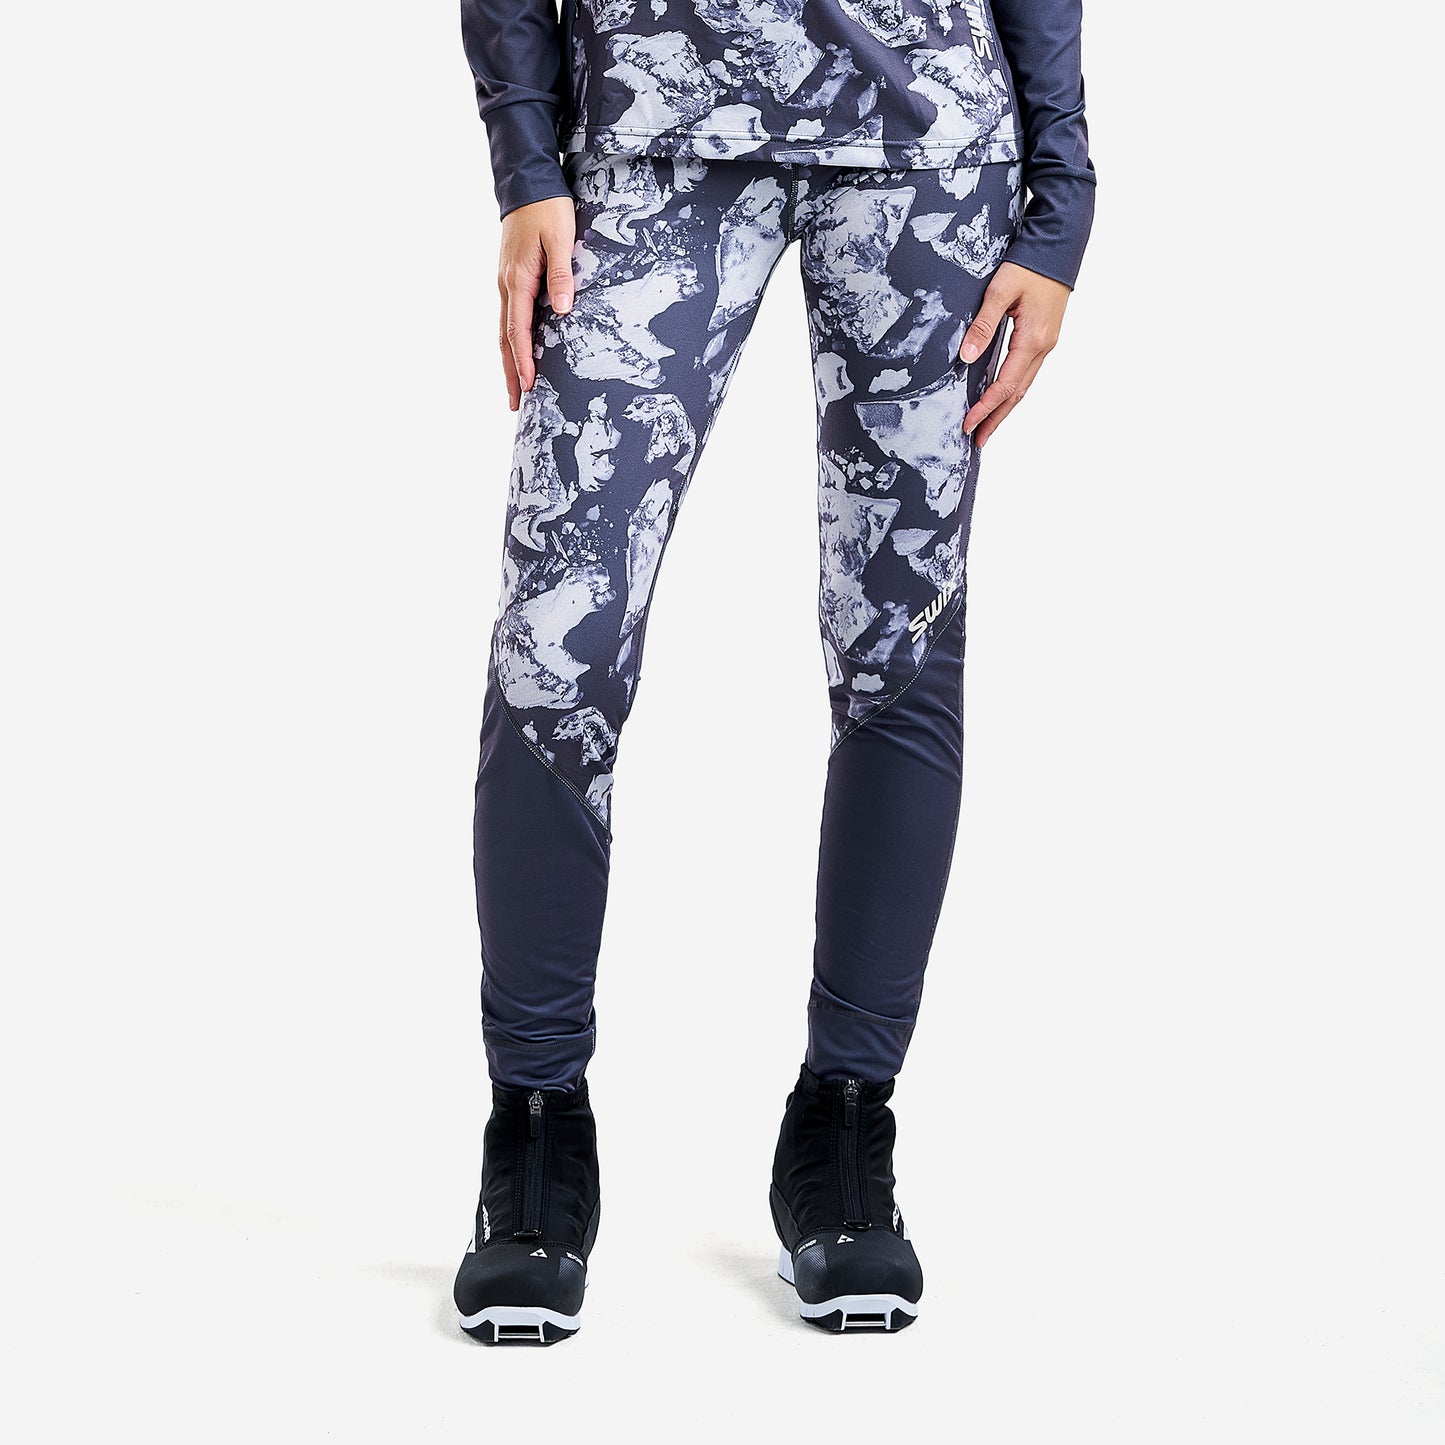 Tista - Women's Tights Mid Layer (Printed)